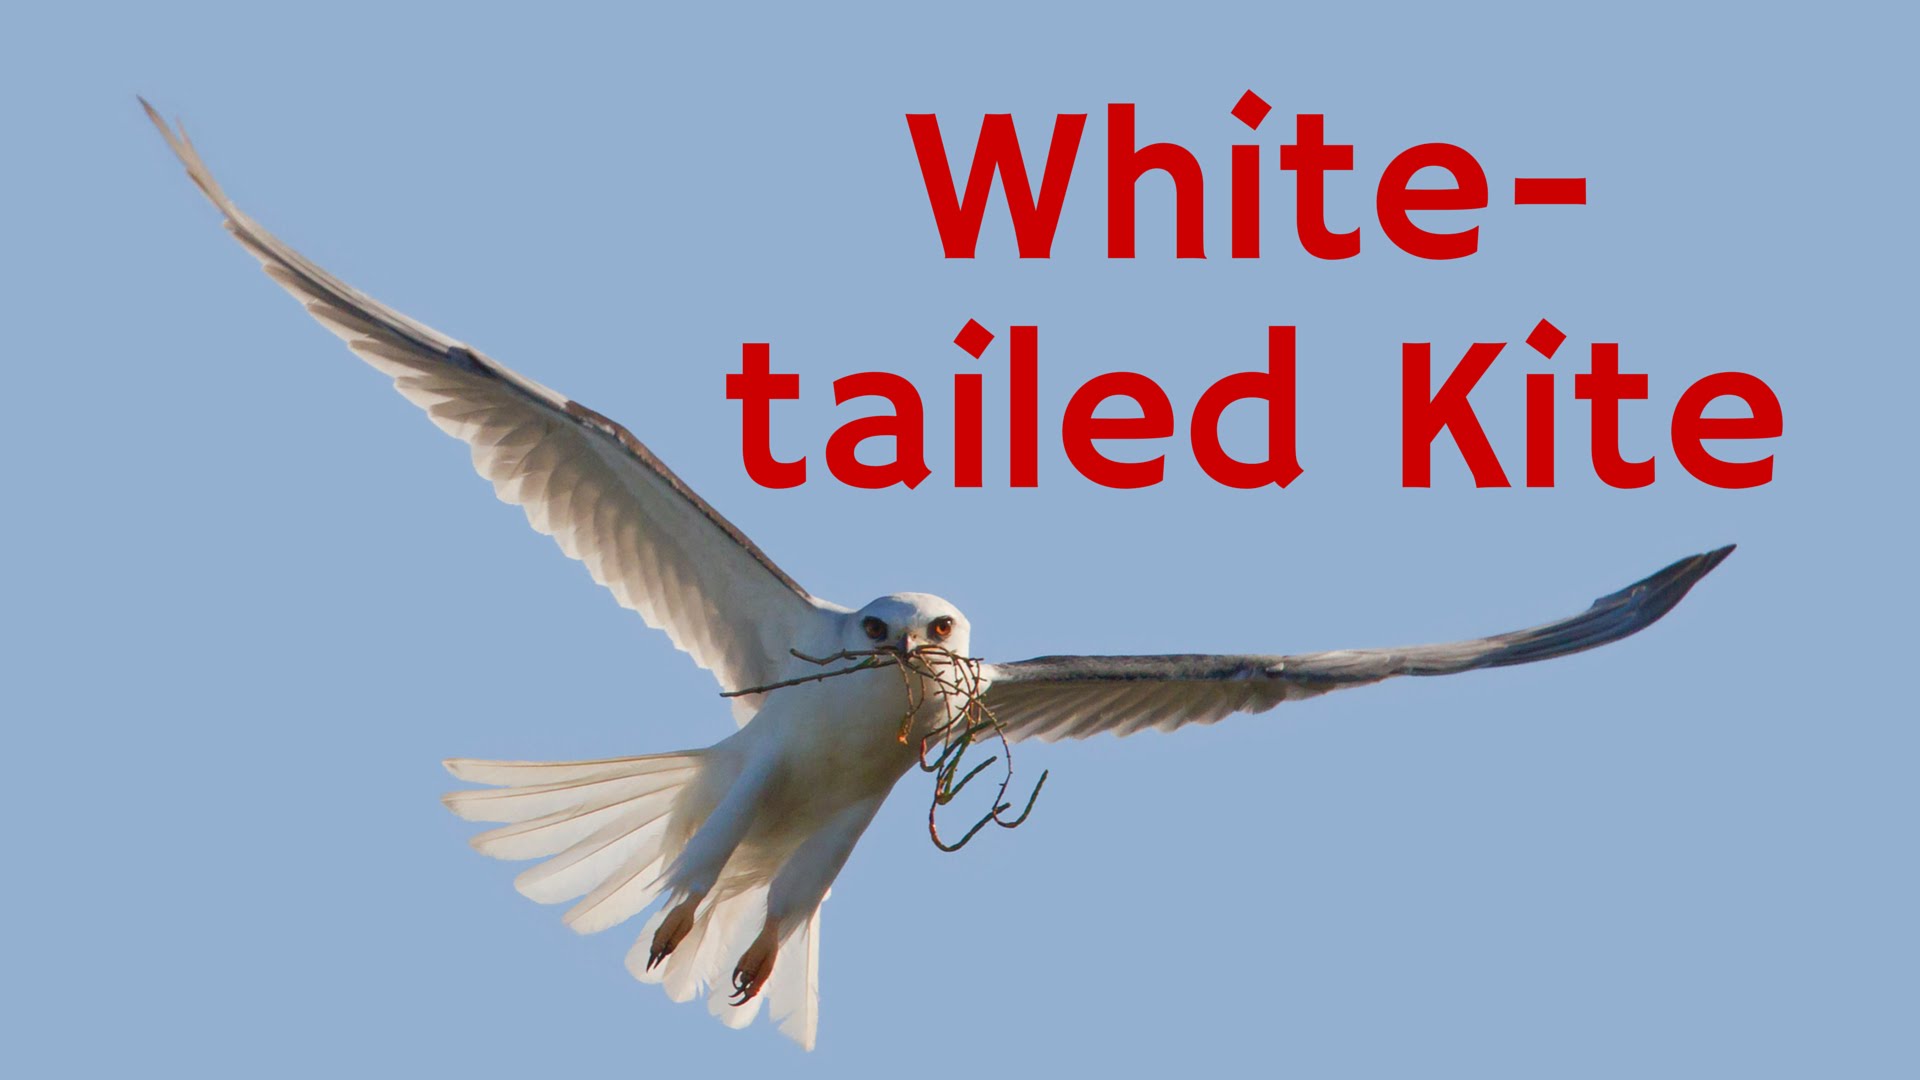 White-tailed Kite: Hovering Above Its Prey - YouTube